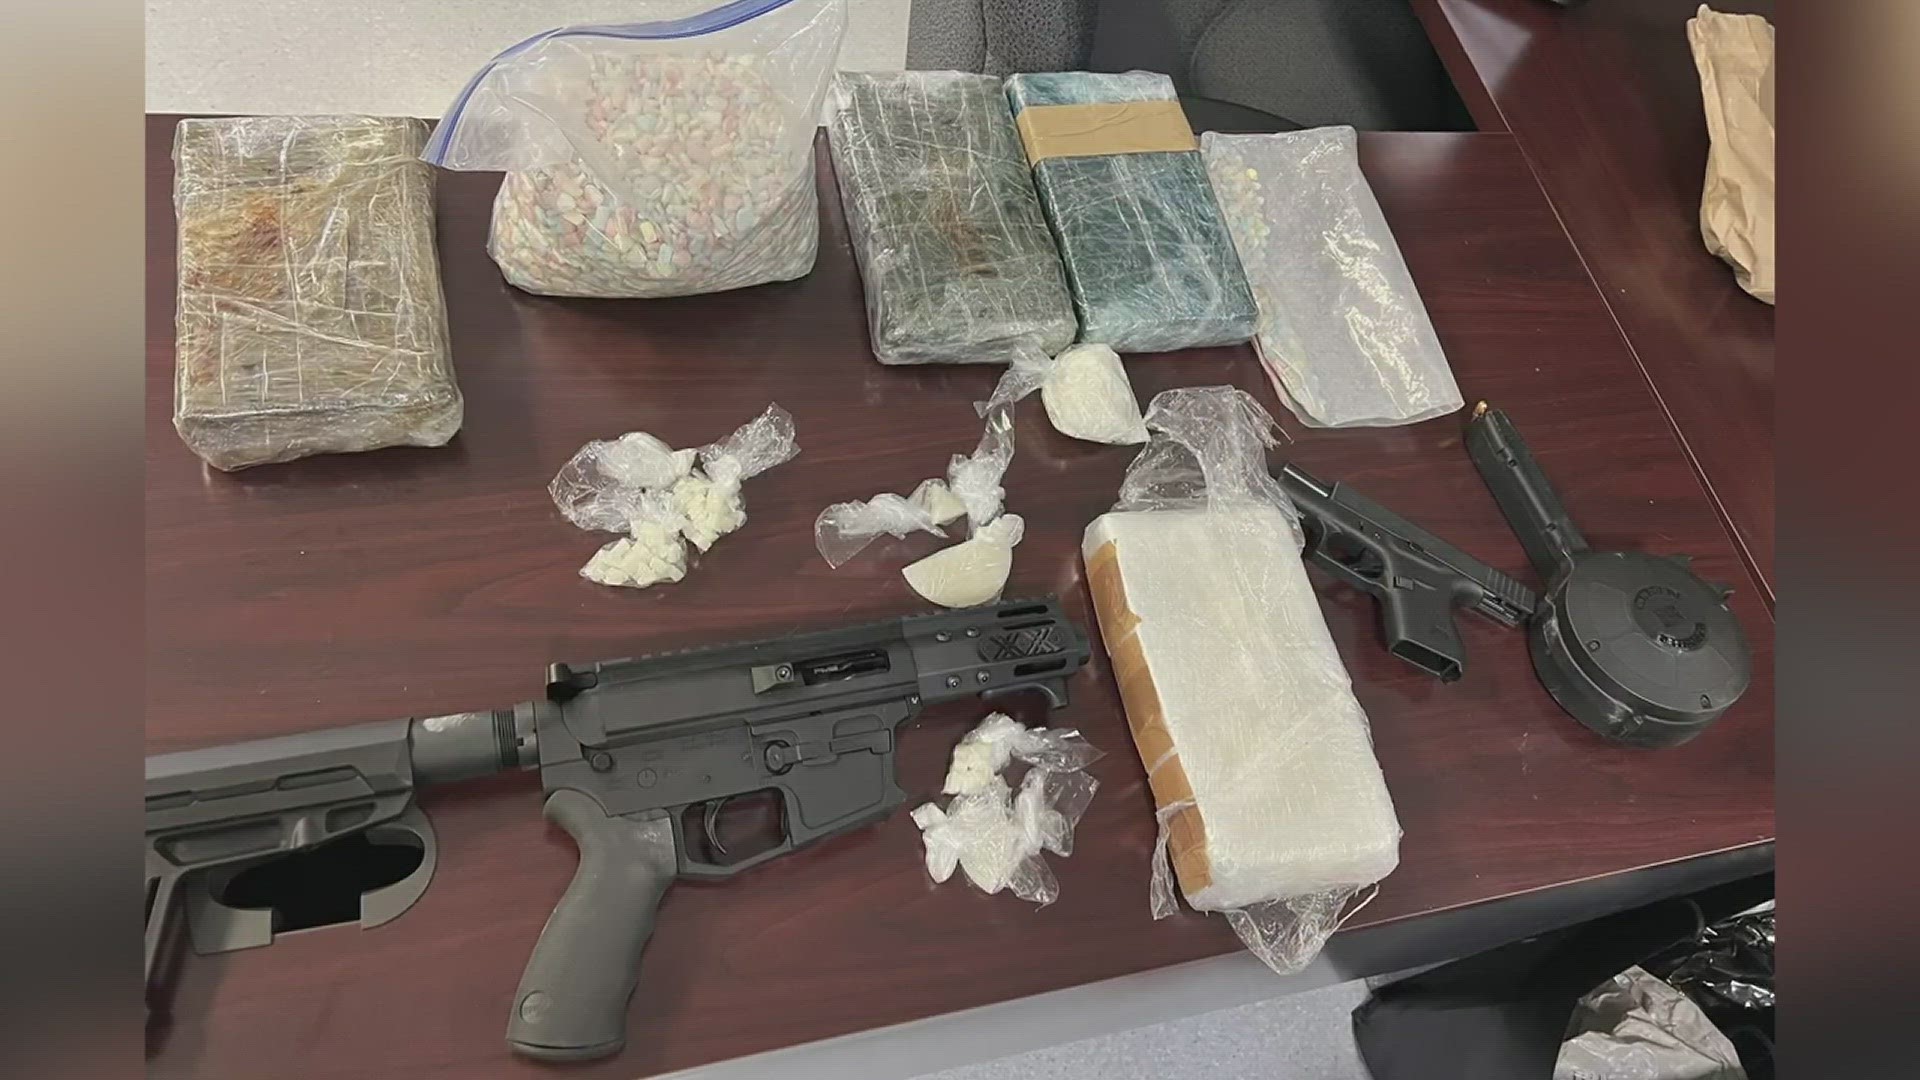 Detectives found more than 4 kilograms of powder cocaine, 3 pounds of ecstasy tablets and two guns inside the residence, according to the release.